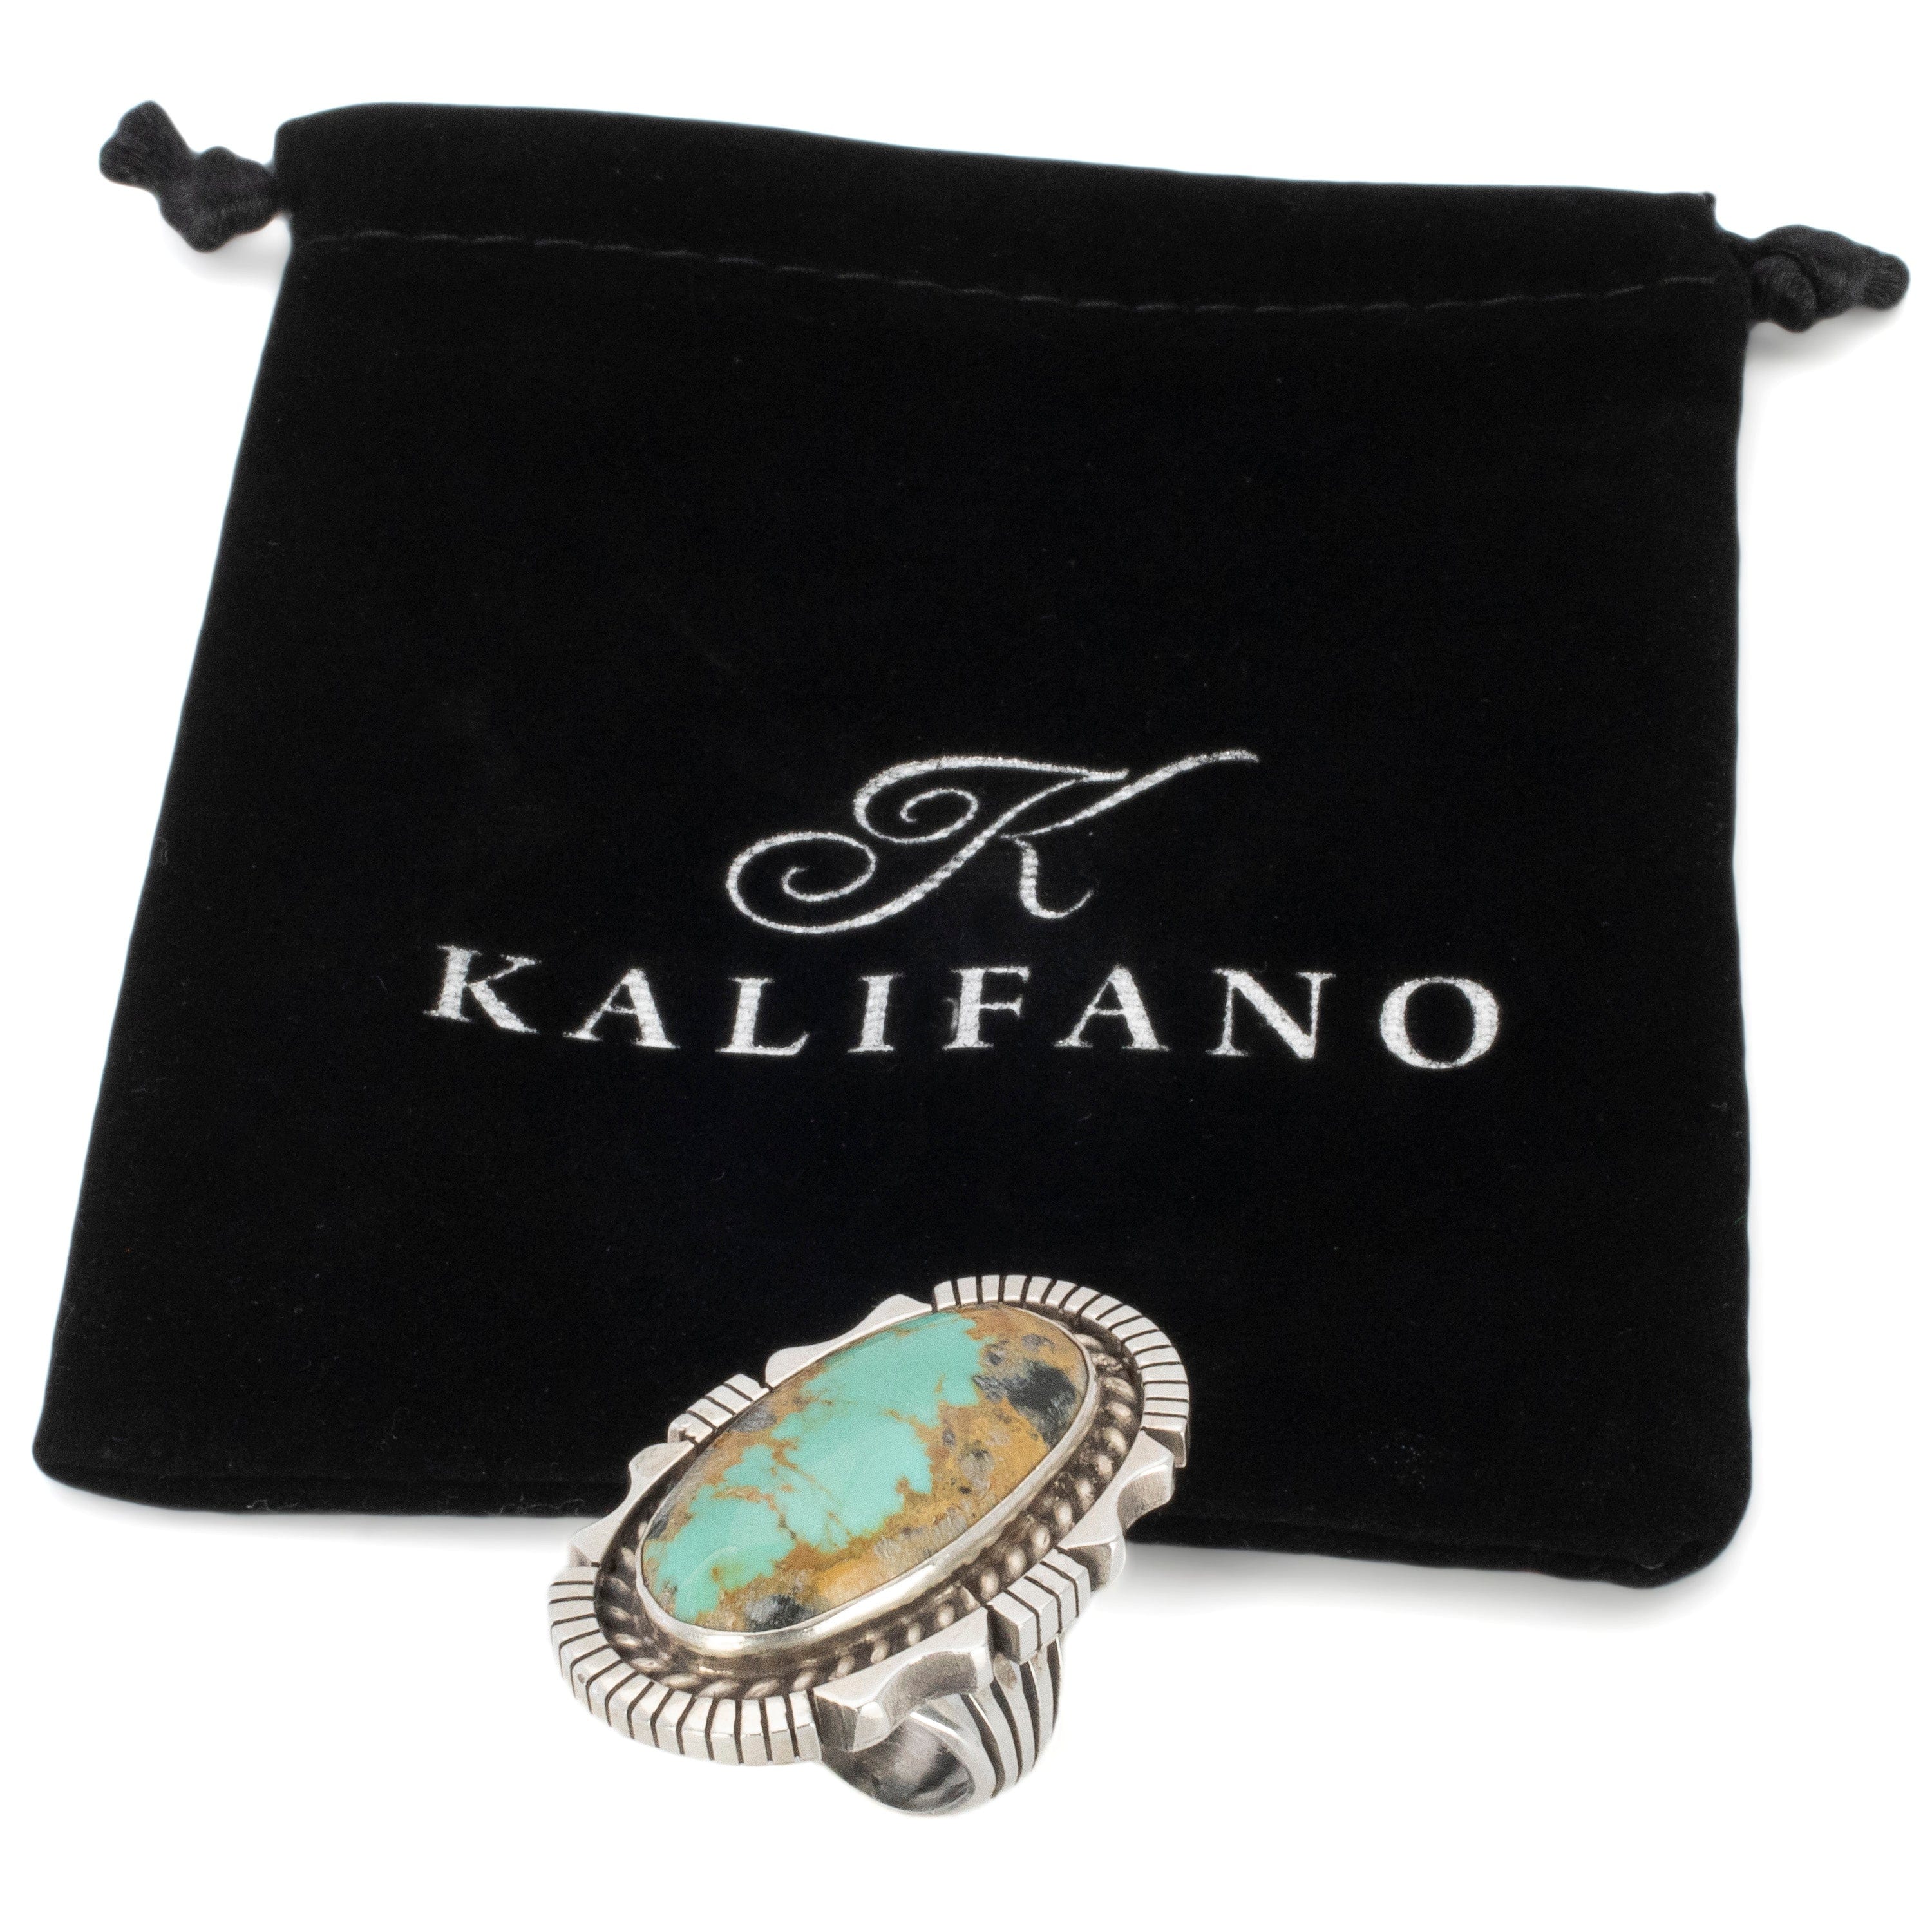 Kalifano Native American Jewelry 6 Eddie Secatero Navajo Tyrone Turquoise USA Native American Made 925 Sterling Silver Ring NAR1200.052.6